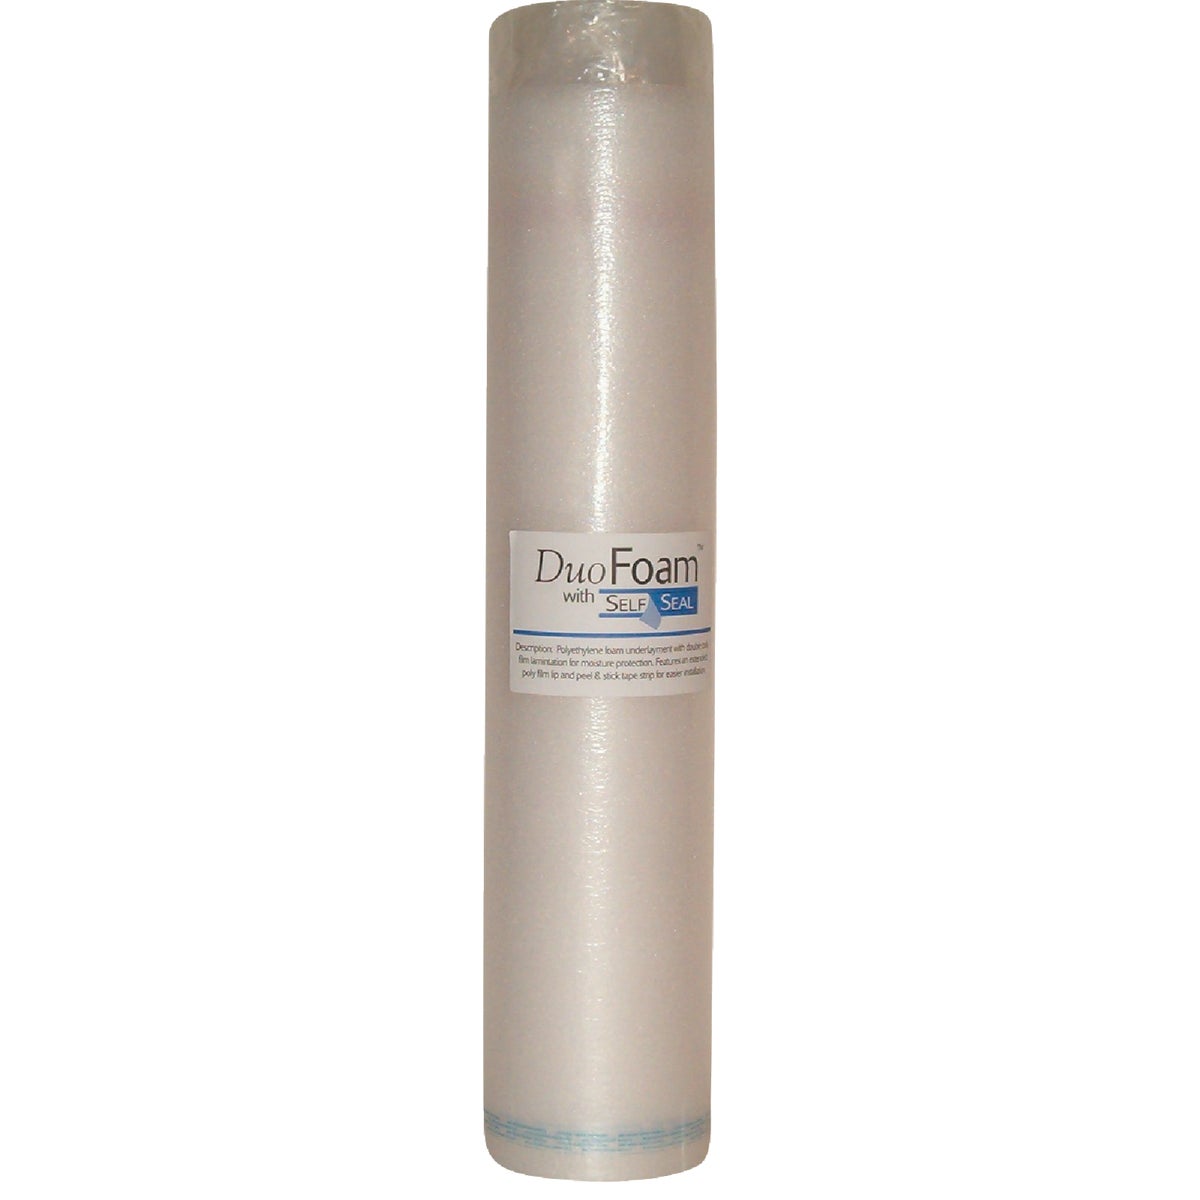 Item 260210, A underlayment designed for floating laminate and wood floors over a 